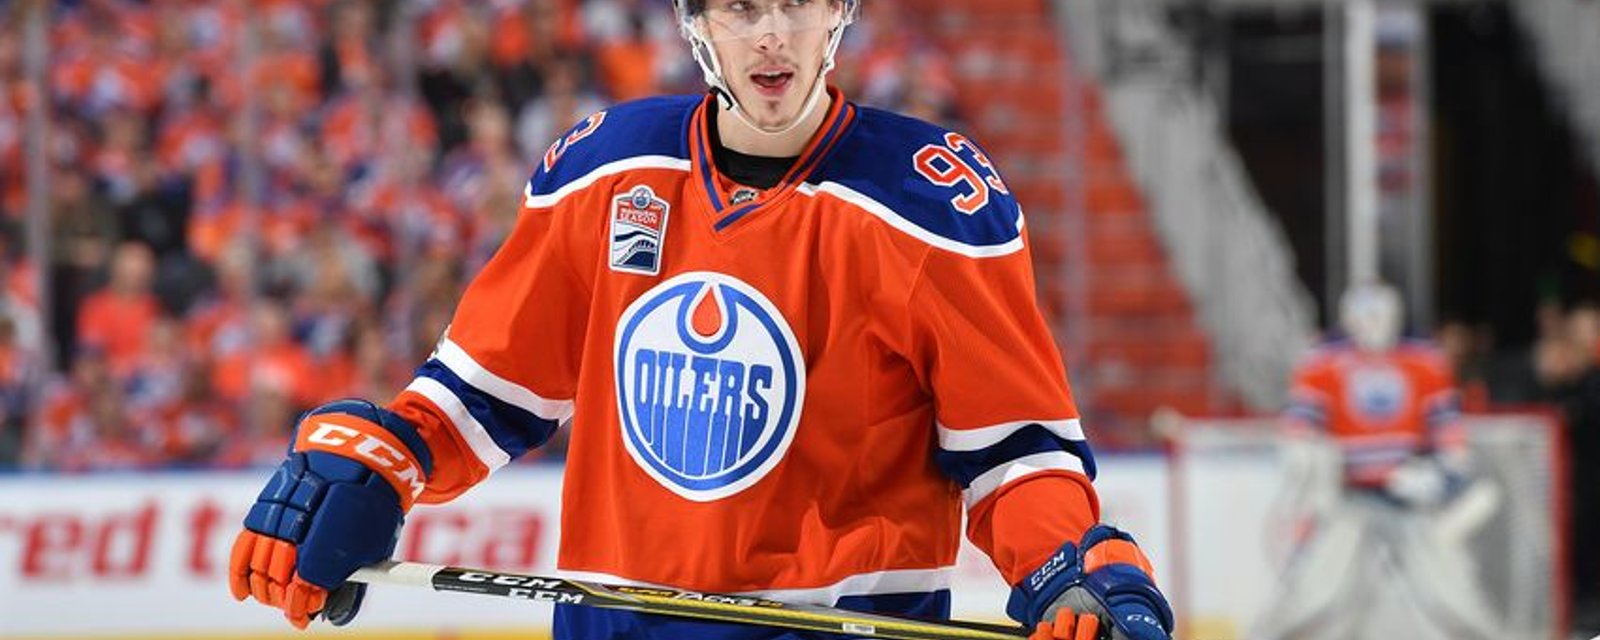 Oilers' Chiarelli had odd discussion about trading Nugent-Hopkins